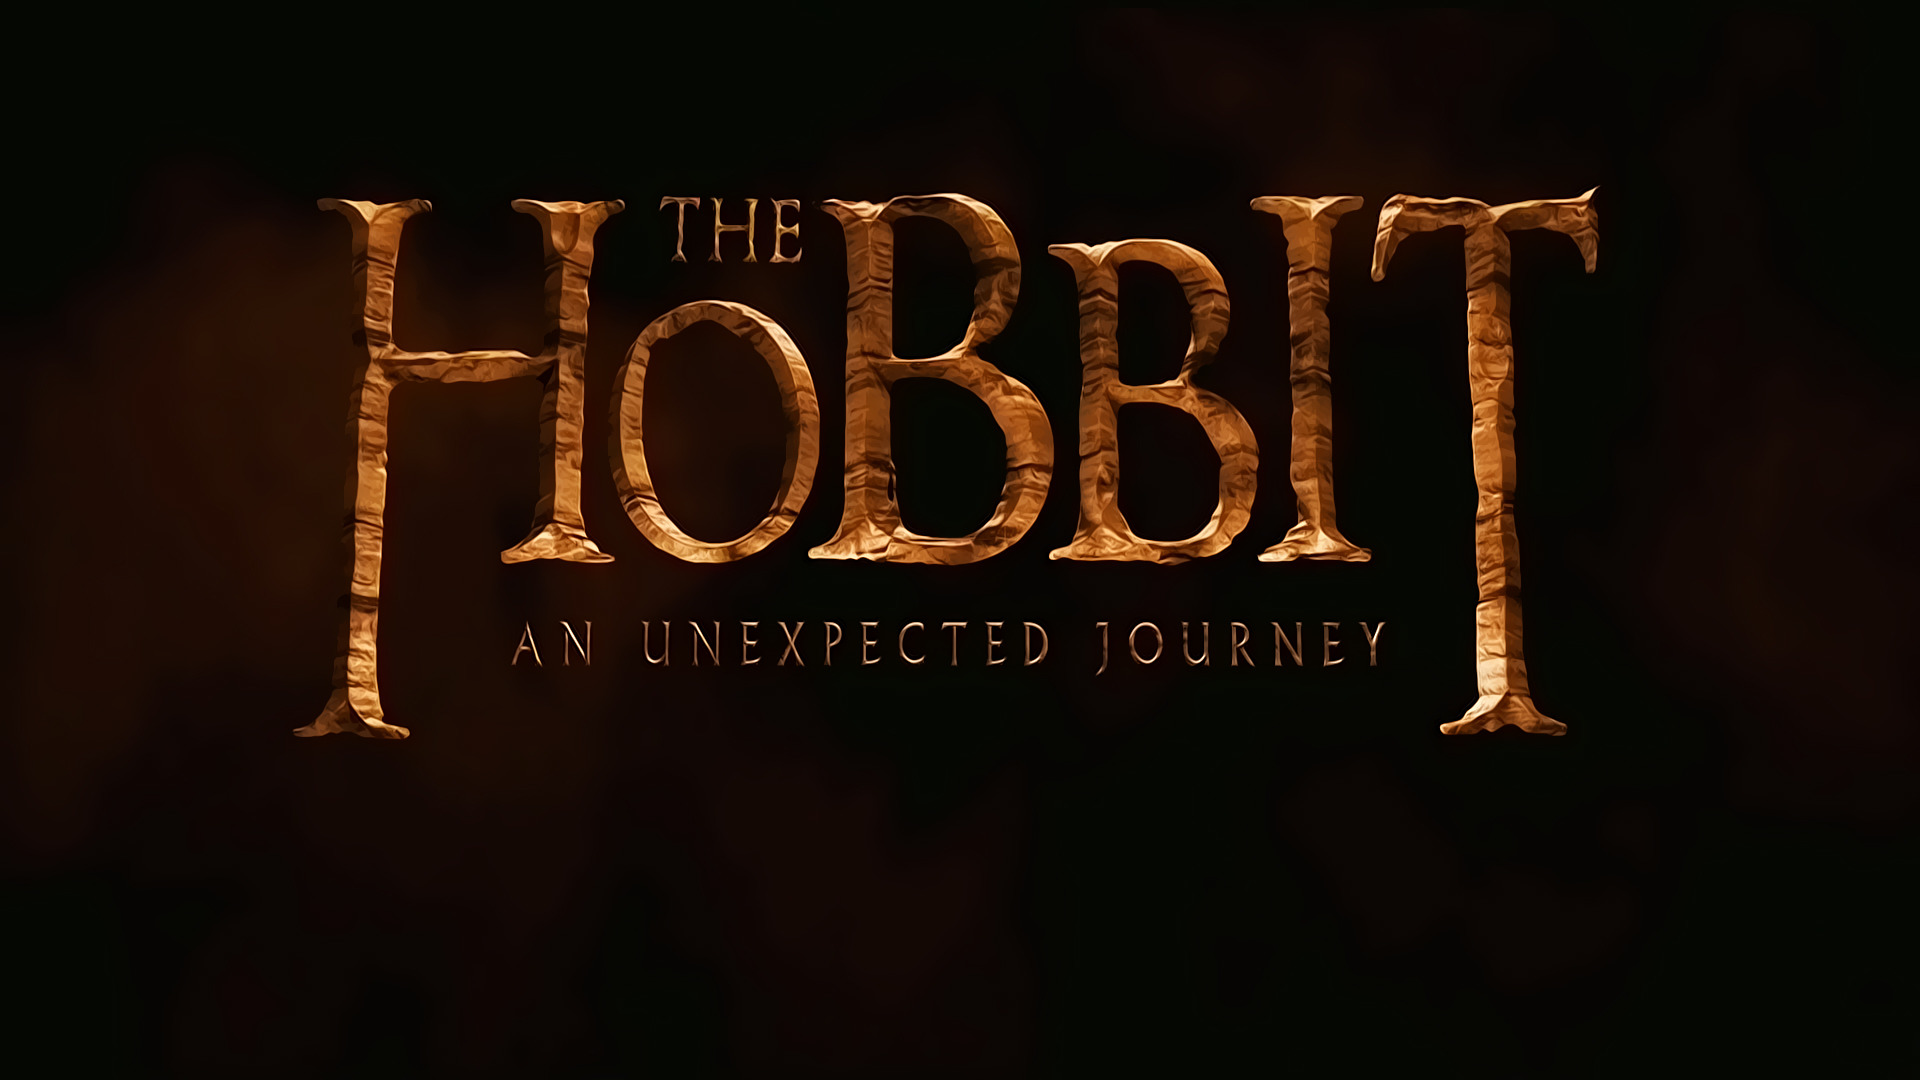 The Hobbit: An Unexpected Journey, Movies Wallpaper